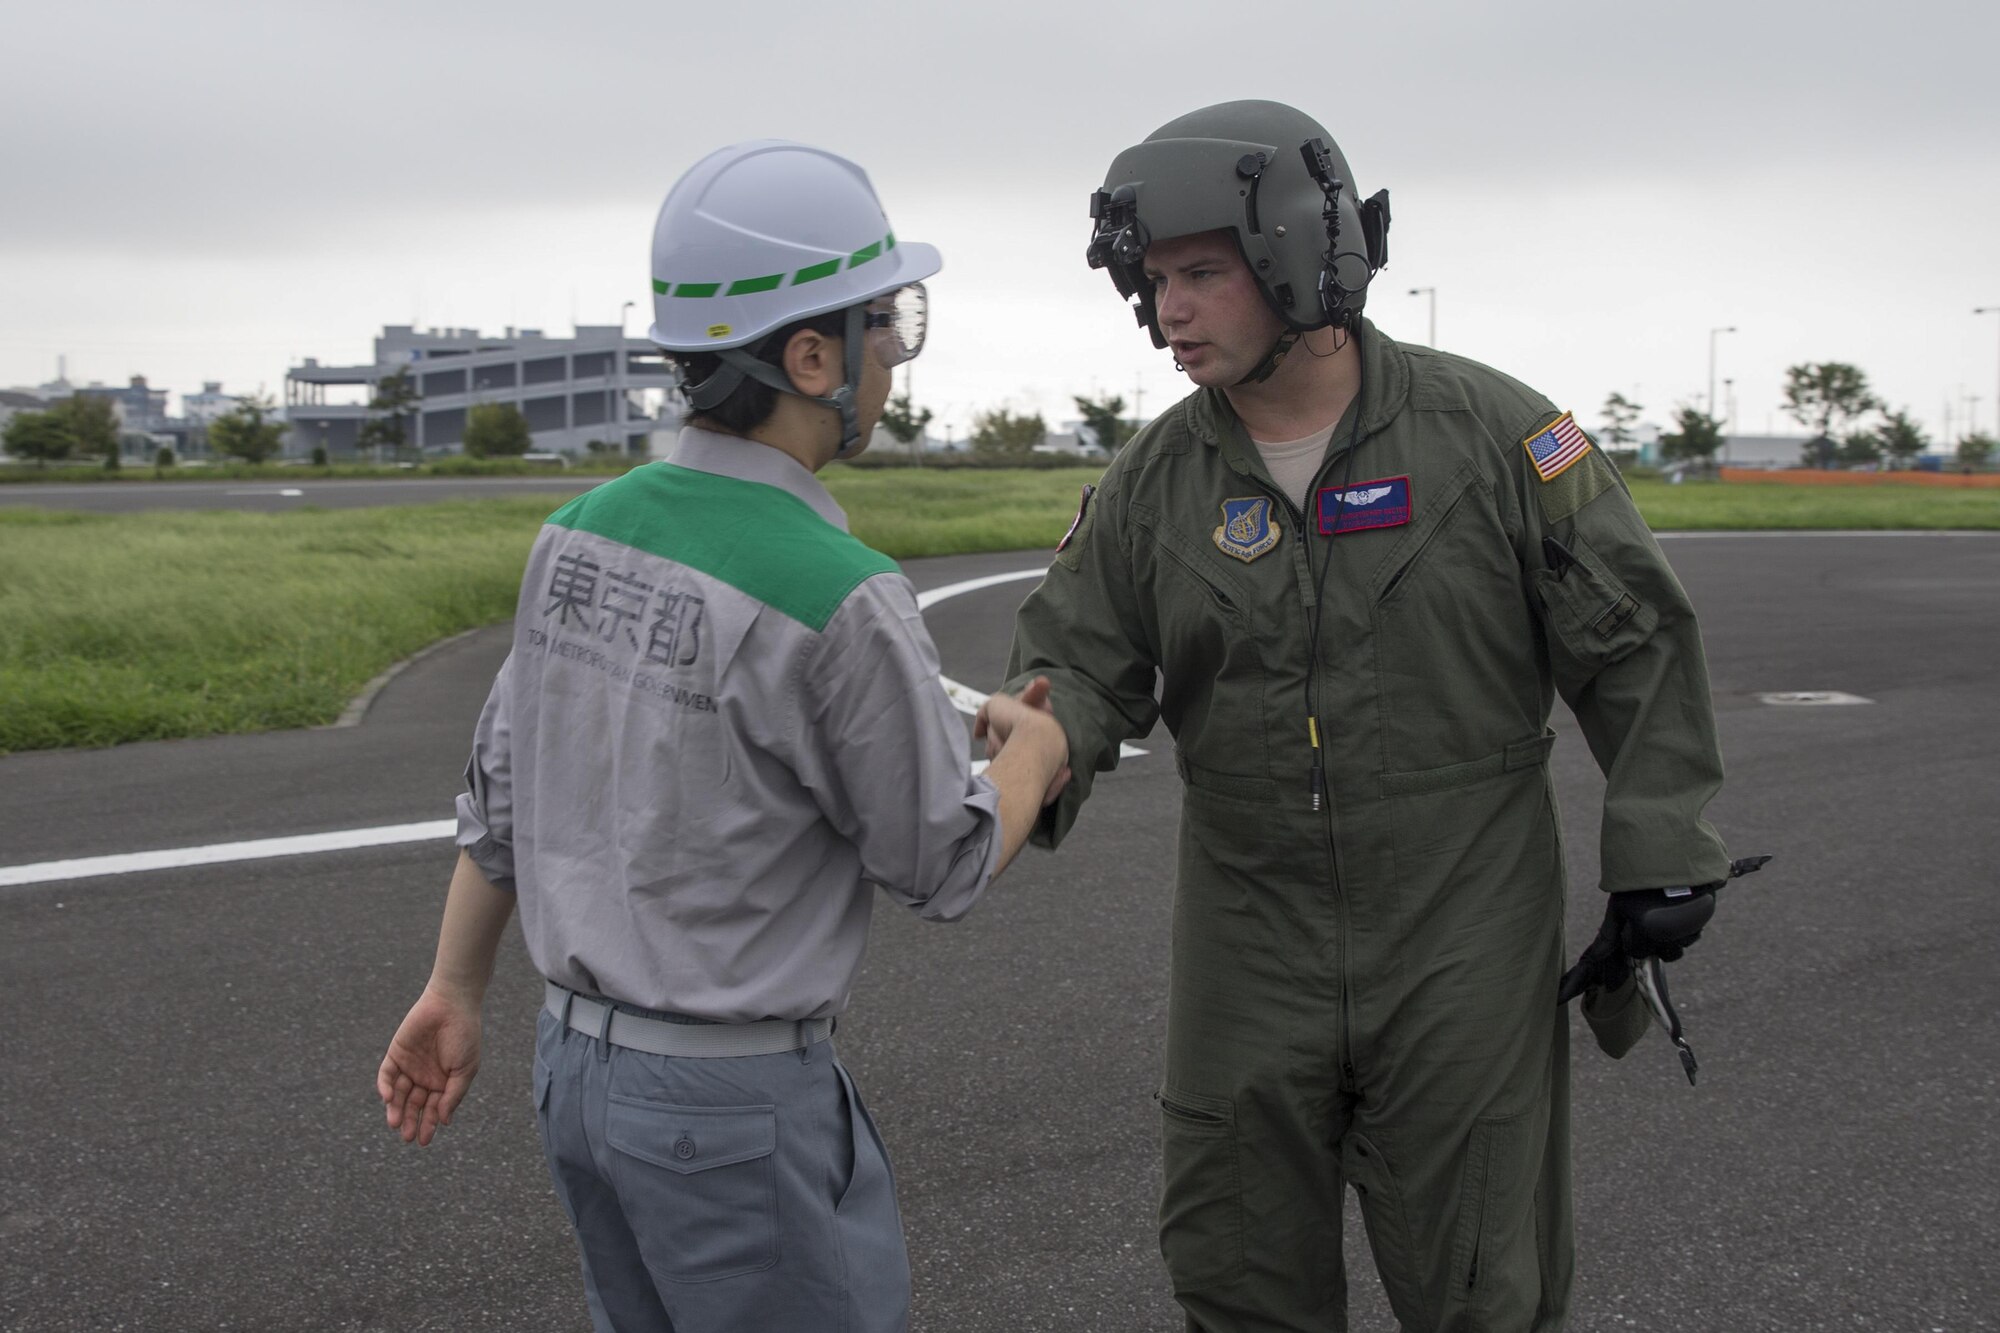 Tech. Sgt. Christopher Rector, 459th Airlift Squadron flight engineer, greets to a member with the Tokyo Metropolitan Government after landing the Tokyo Rinkai Disaster Prevention Park, Japan, Sept. 4, 2016, during the Annual Tokyo Metropolitan Government Disaster Management Drill. Airmen with the 459 AS practiced delivering simulated relief supplies to Tokyo Rinkai Disaster Prevention Park in downtown Tokyo. The park is located in the Ariake area and is a disaster countermeasure headquarters of the Government of Japan and other local governments during large-scale earthquakes in the metropolitan area. (U.S. Air Force photo by Yasuo Osakabe/Released)    